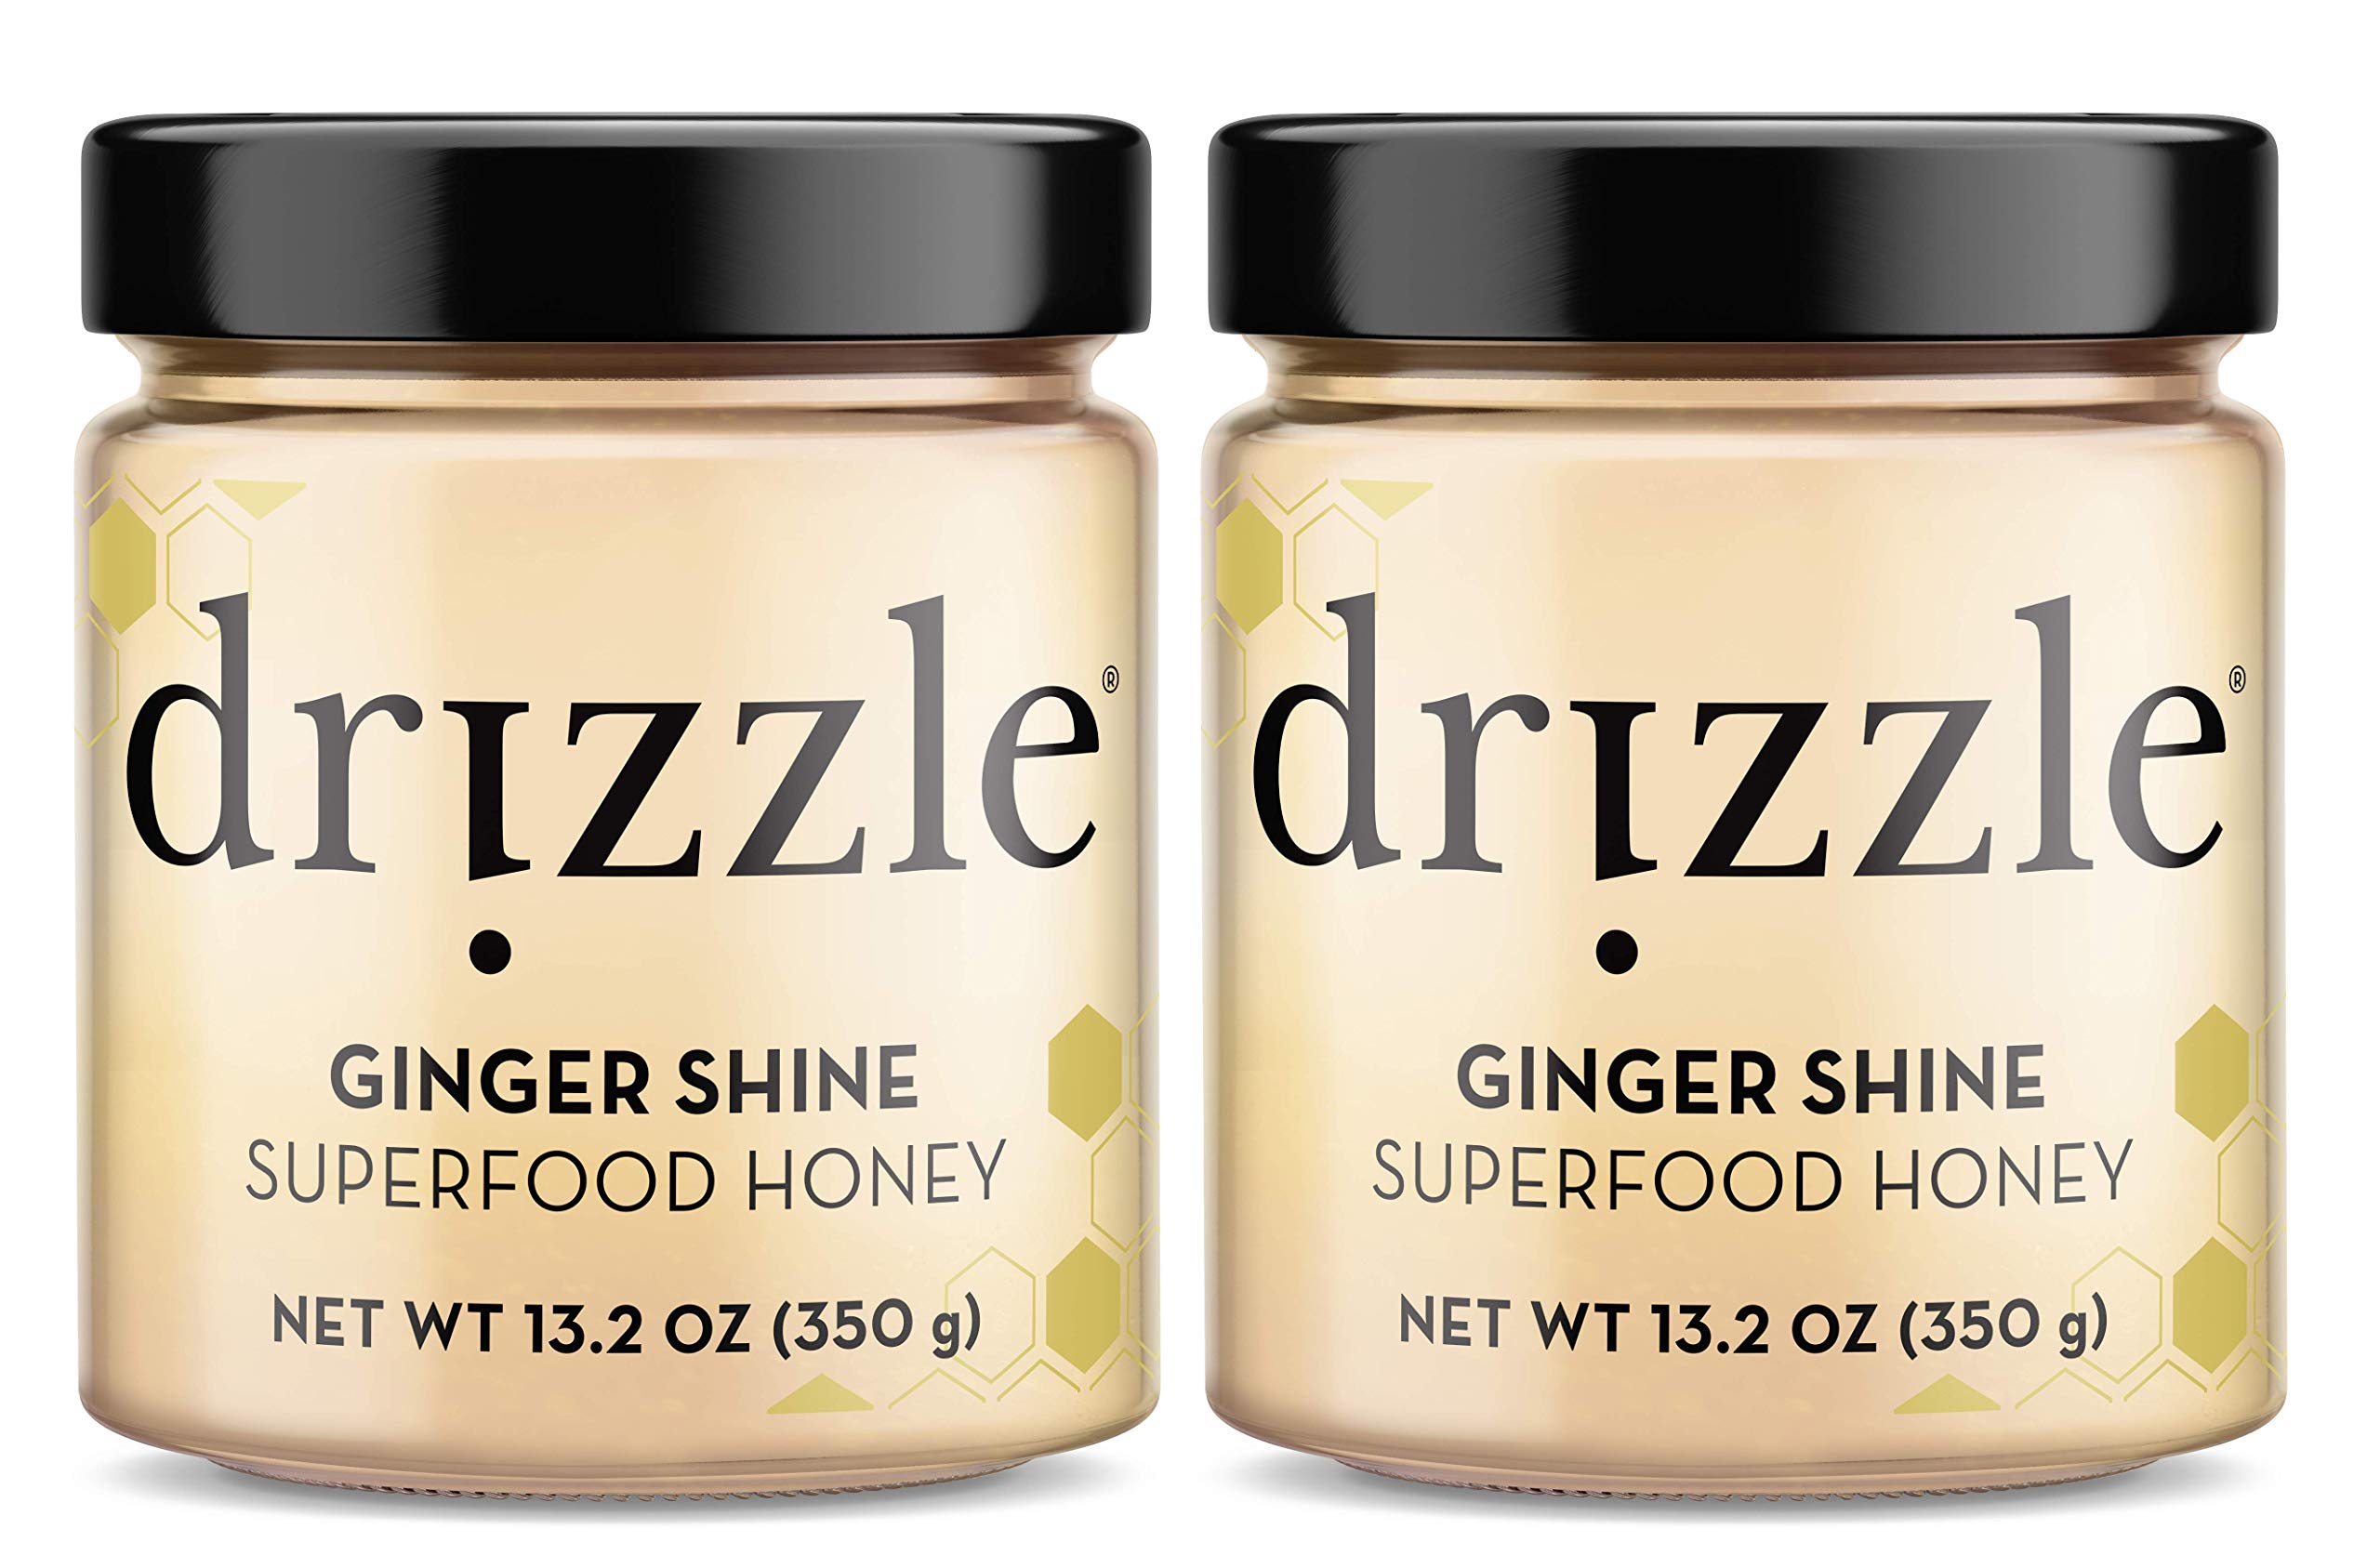 Drizzle Ginger Shine Raw Honey - Superfood Immunity Boost Blend - Rich in Nutrients and Beneficial Enzymes - Notes of Ginger & Lemon - 100% Raw, Pu...